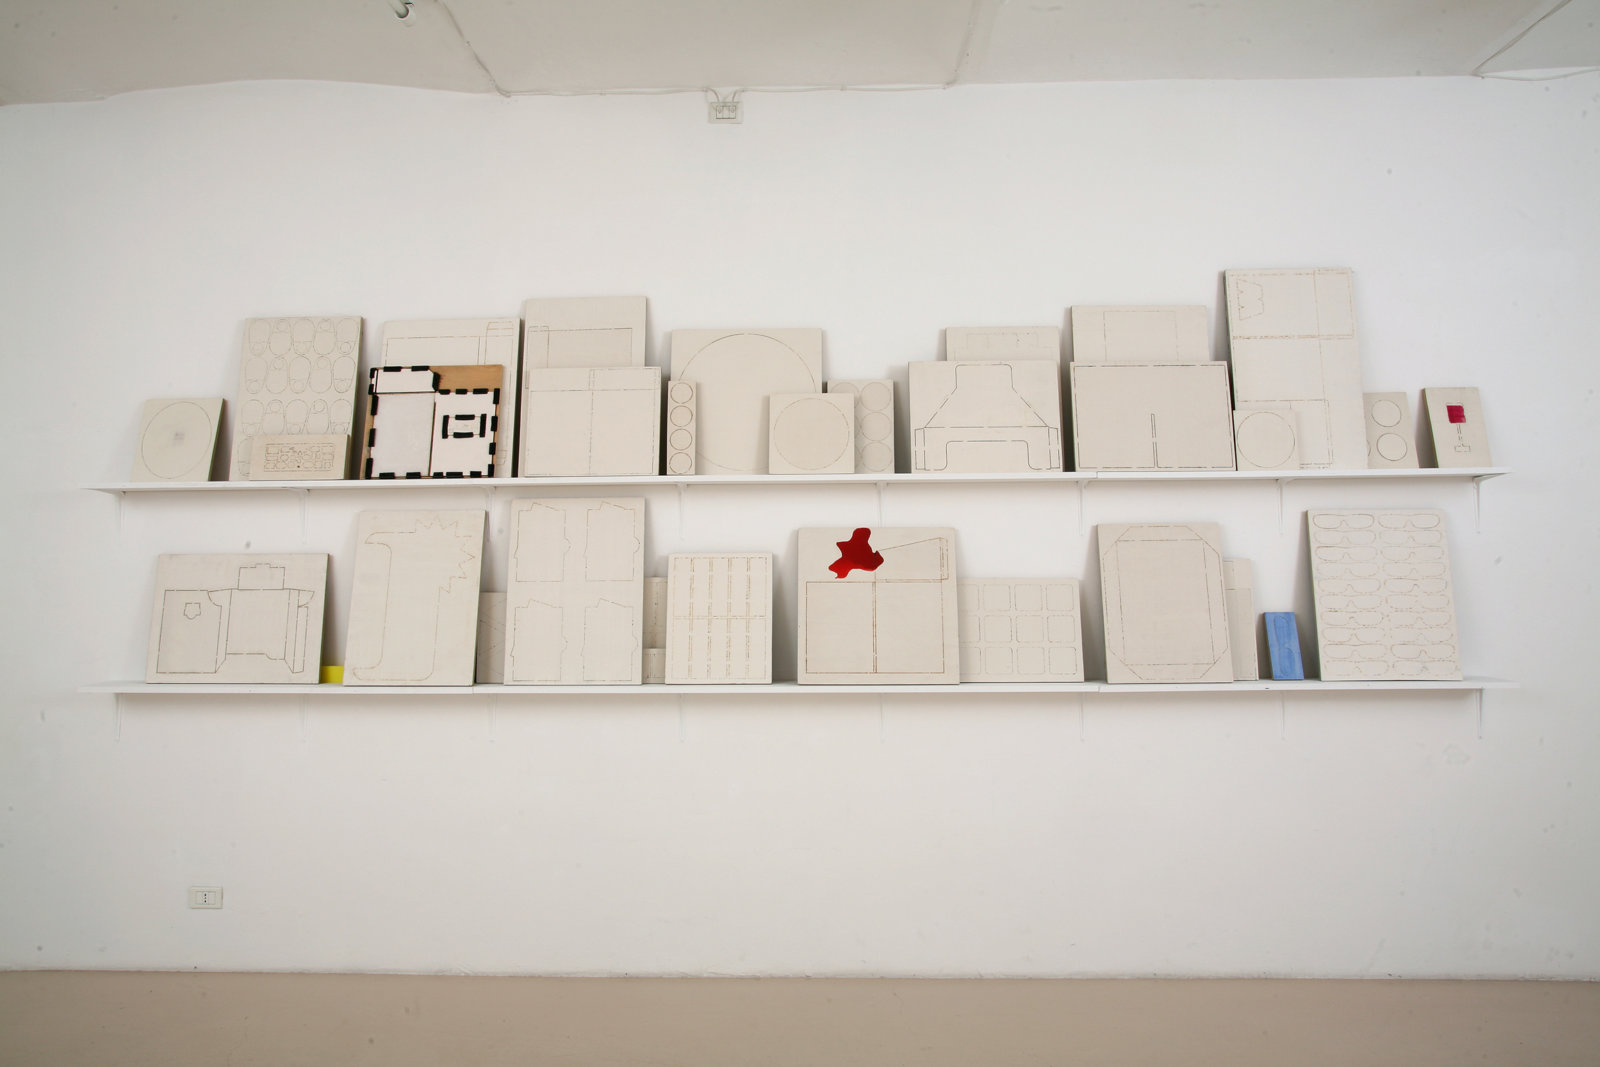 Christina Mackie, The Dies, 2008, gesso, wood, steel, watercolour, plastic, plaster, rubber, shelves and brackets, dimensions variable